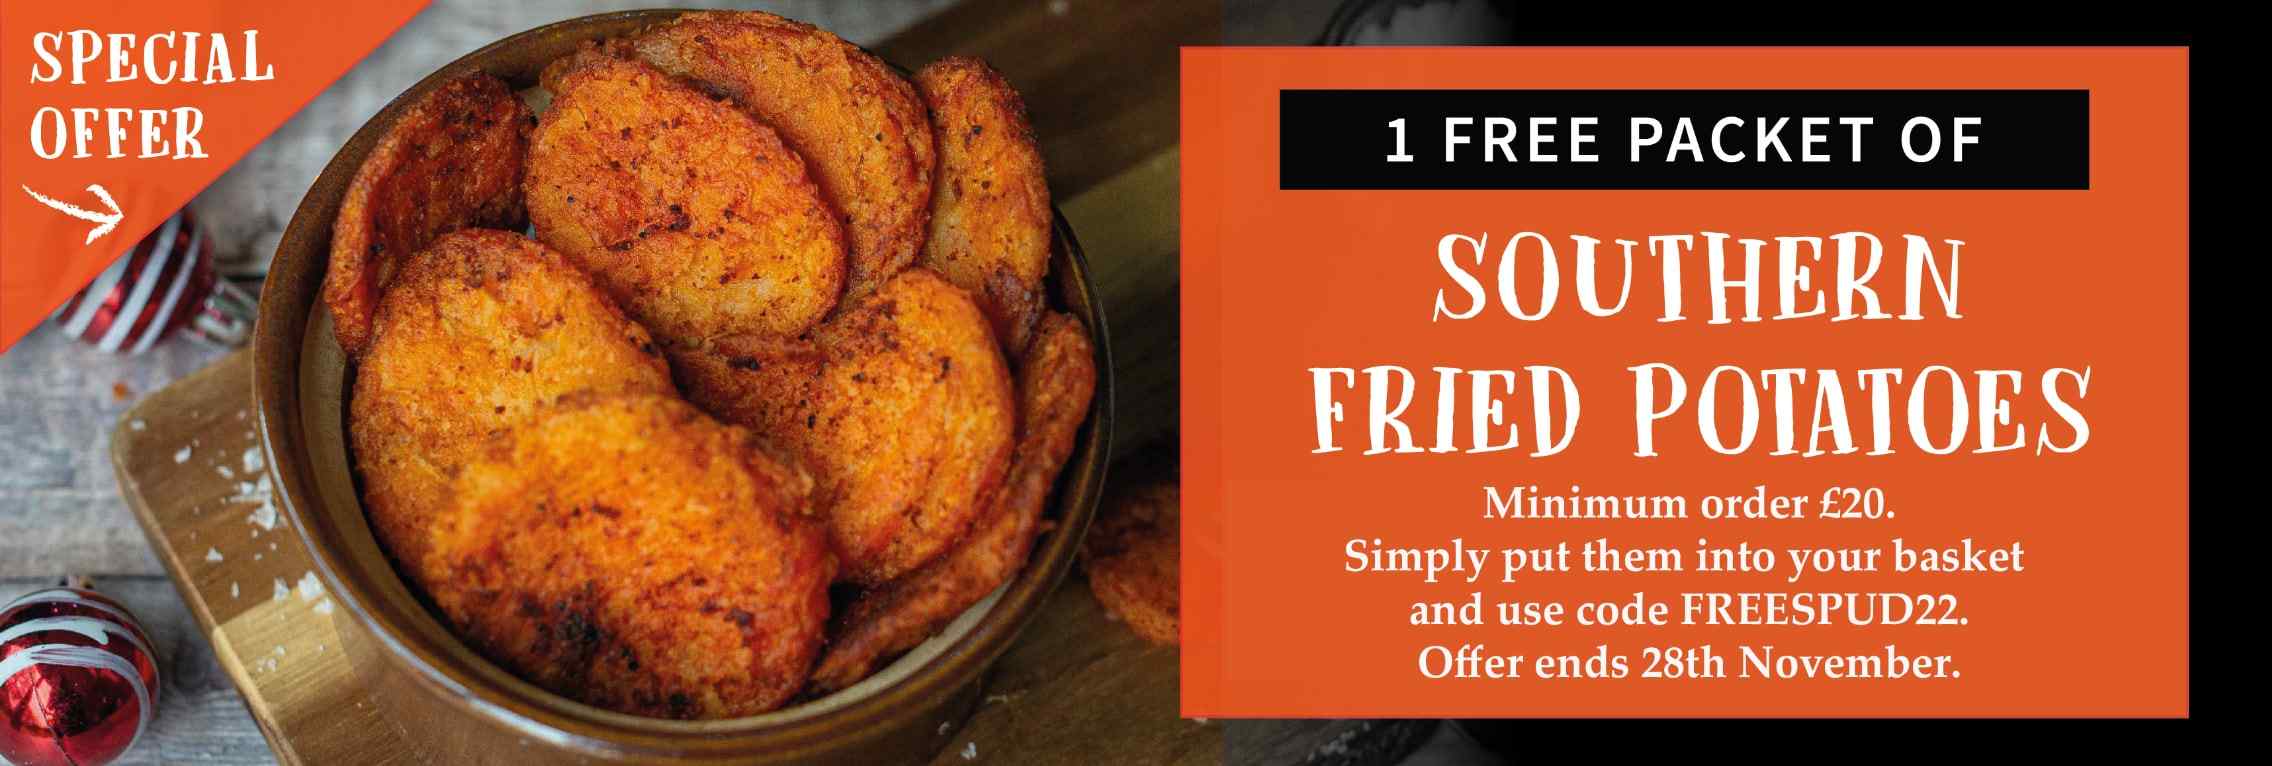 1 Free Pack of Southern Fried Potatoes, minimum order £20, using code, offer ends 28th November